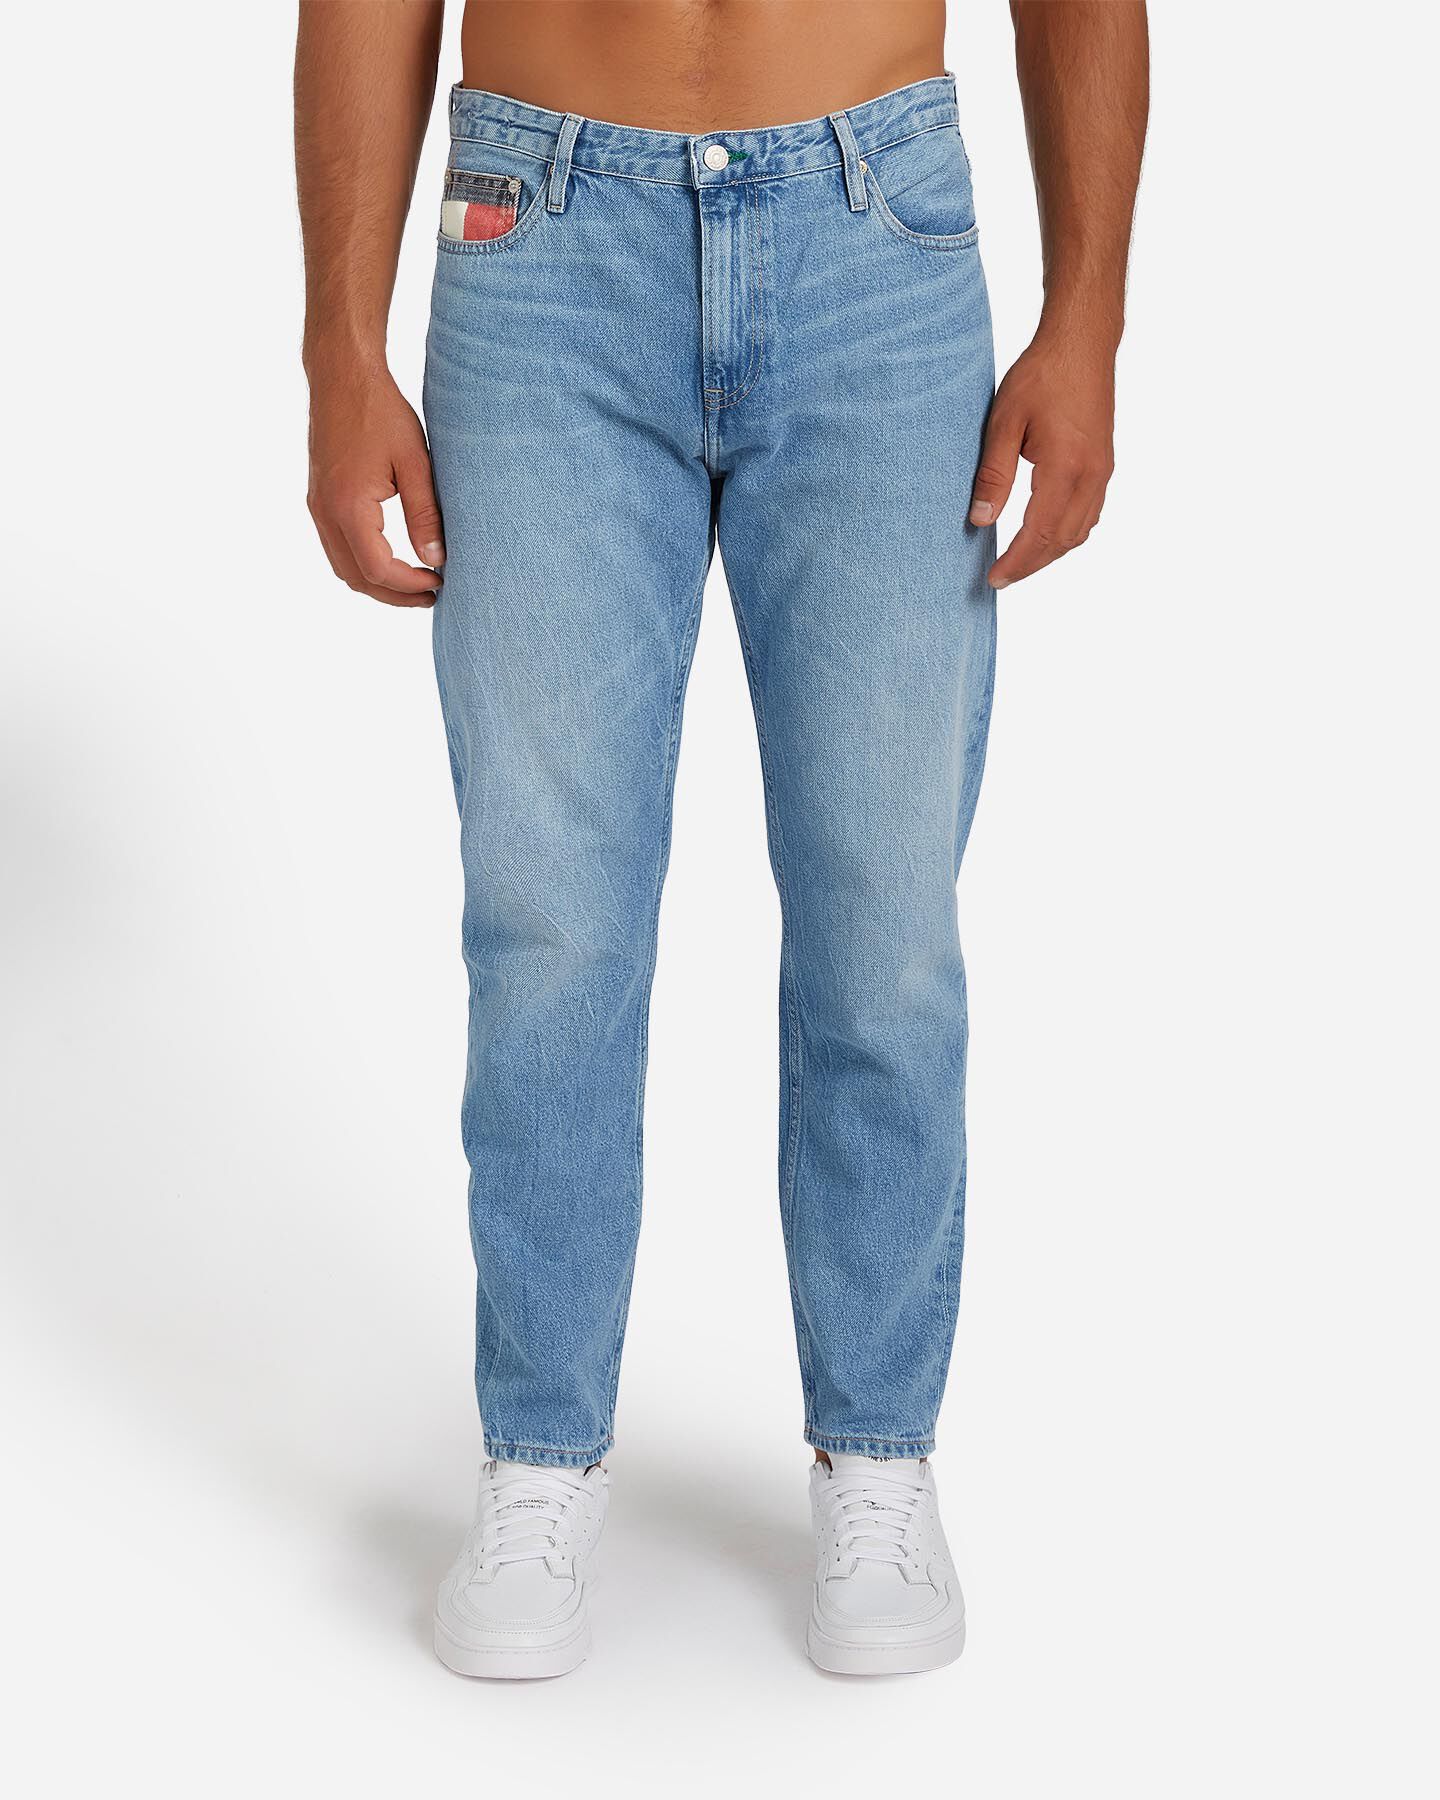  Jeans TOMMY HILFIGER DAD STRAIGHT M S4082066|1A5|28 scatto 0